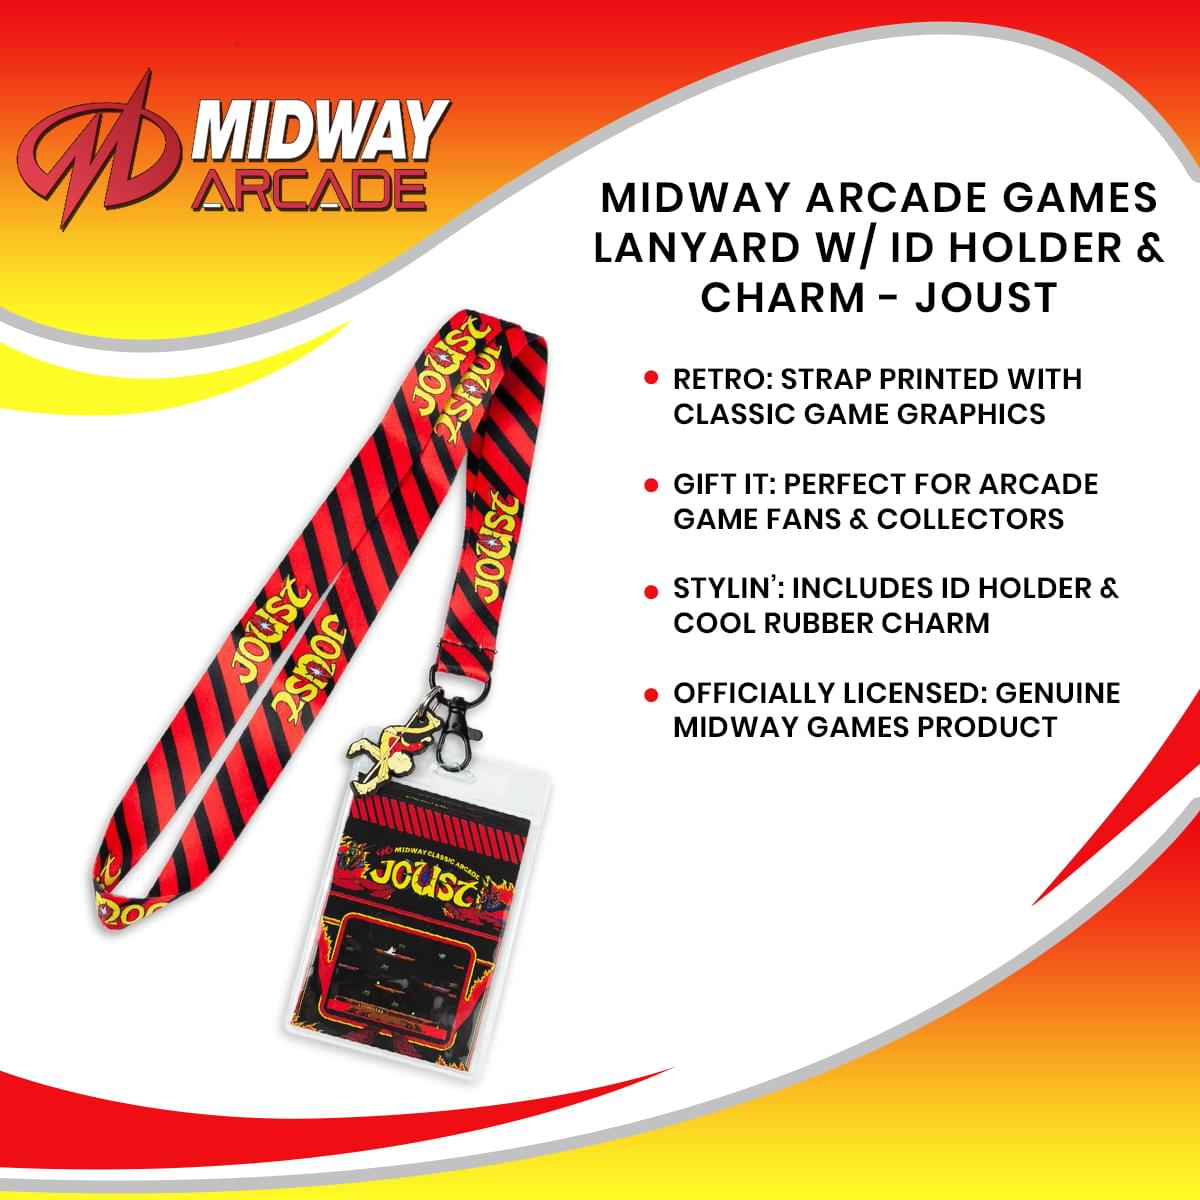 Crowded Coop Midway Arcade Games Lanyard w/ ID Holder & Charm - Gauntlet